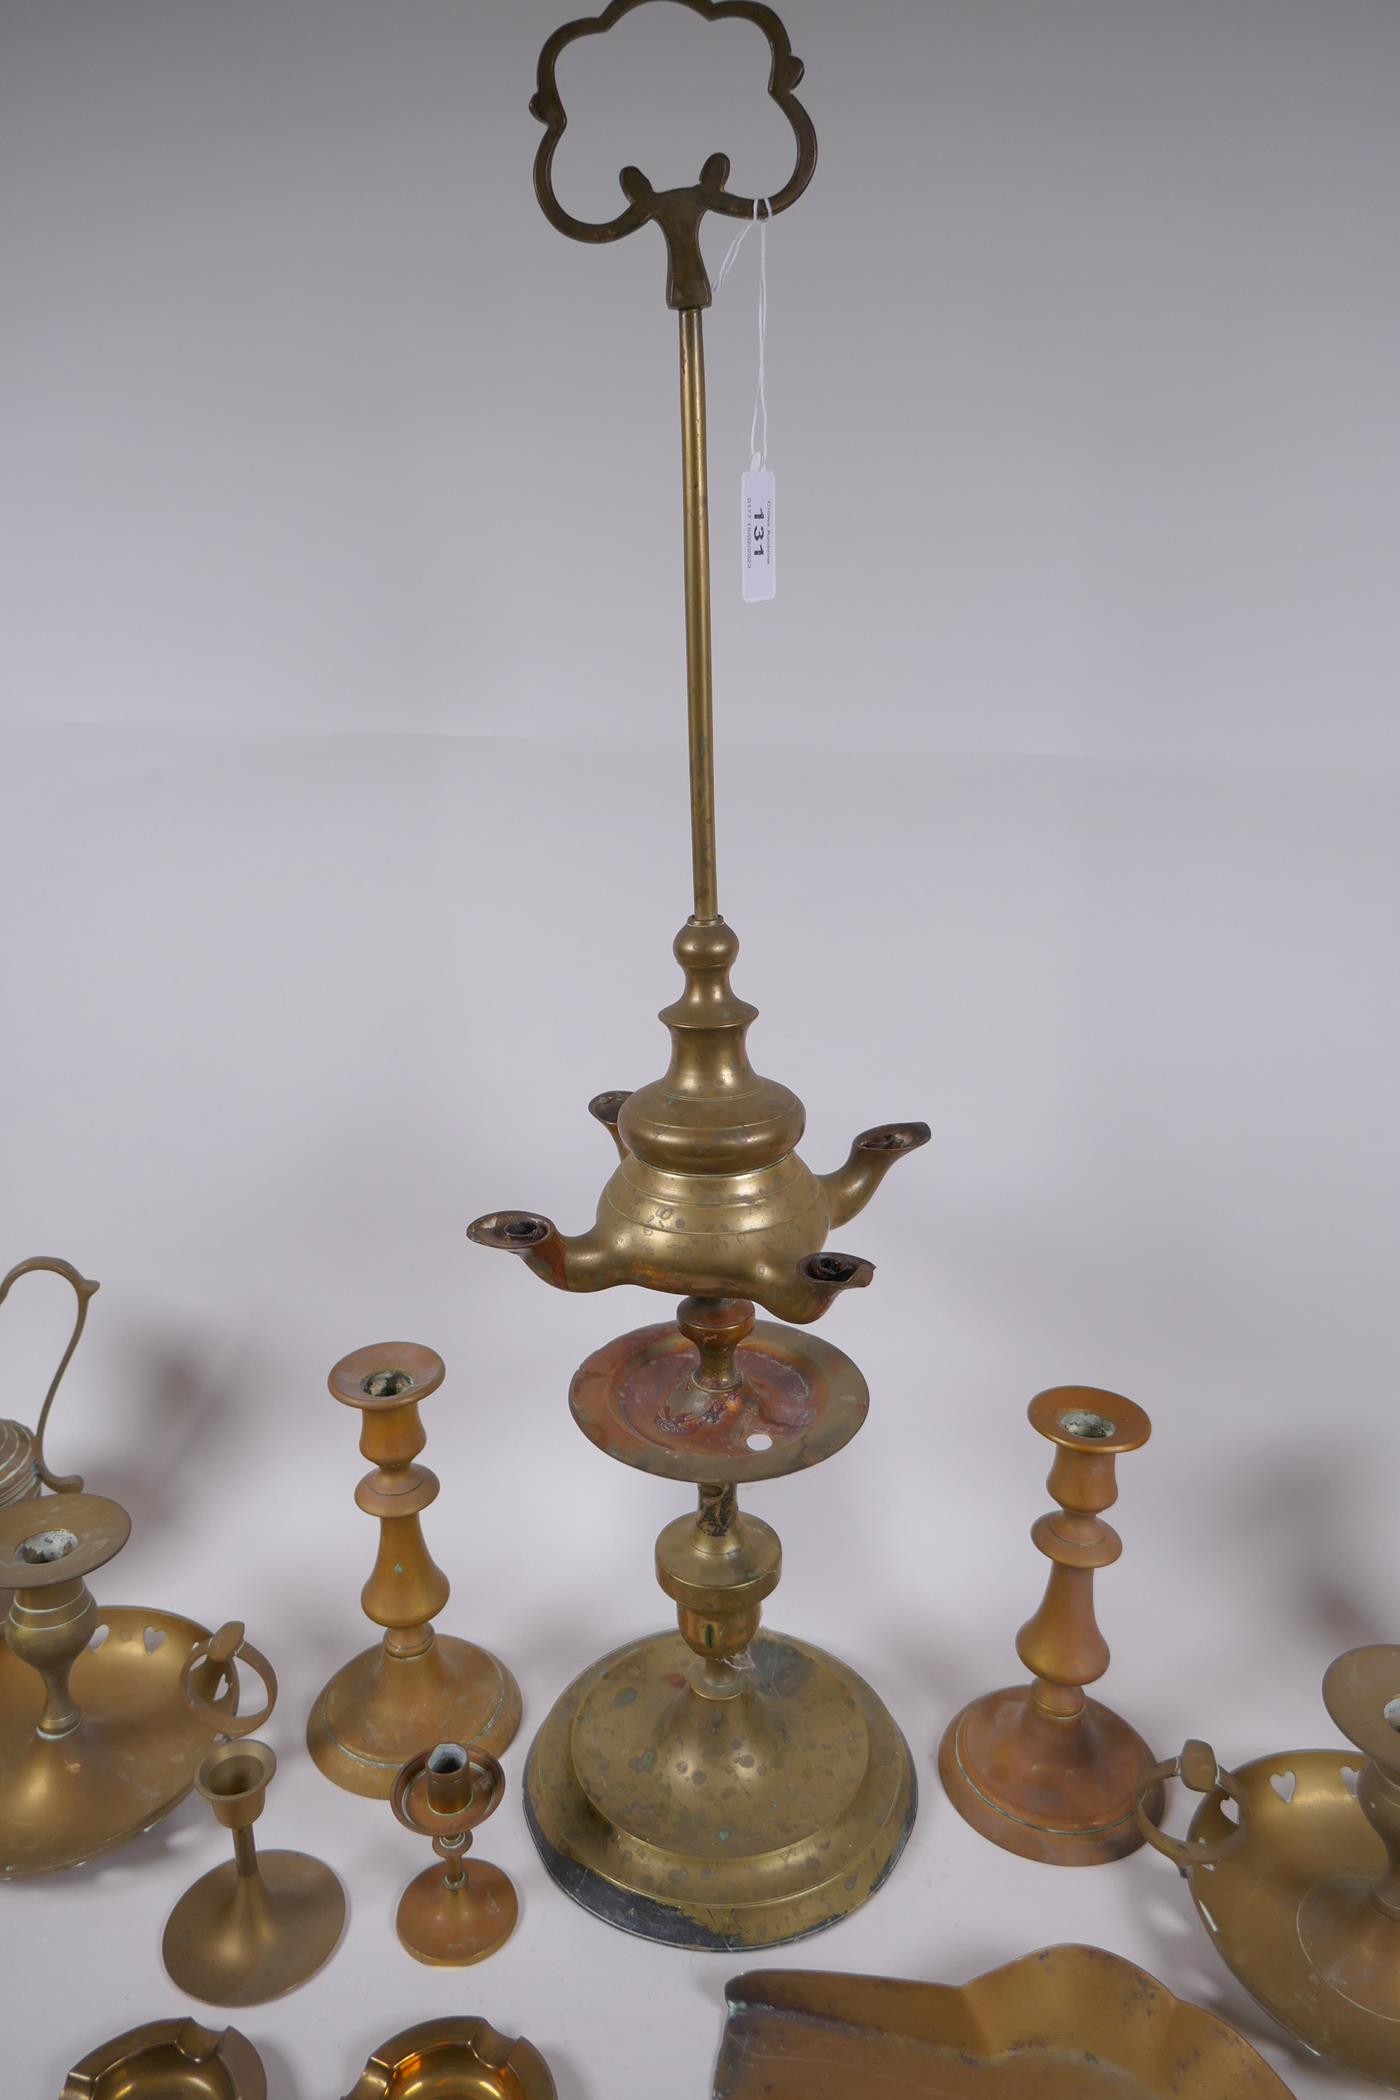 A quantity of brassware including a four spout whale oil lamp, pairs of candlesticks, ash trays, - Image 2 of 7